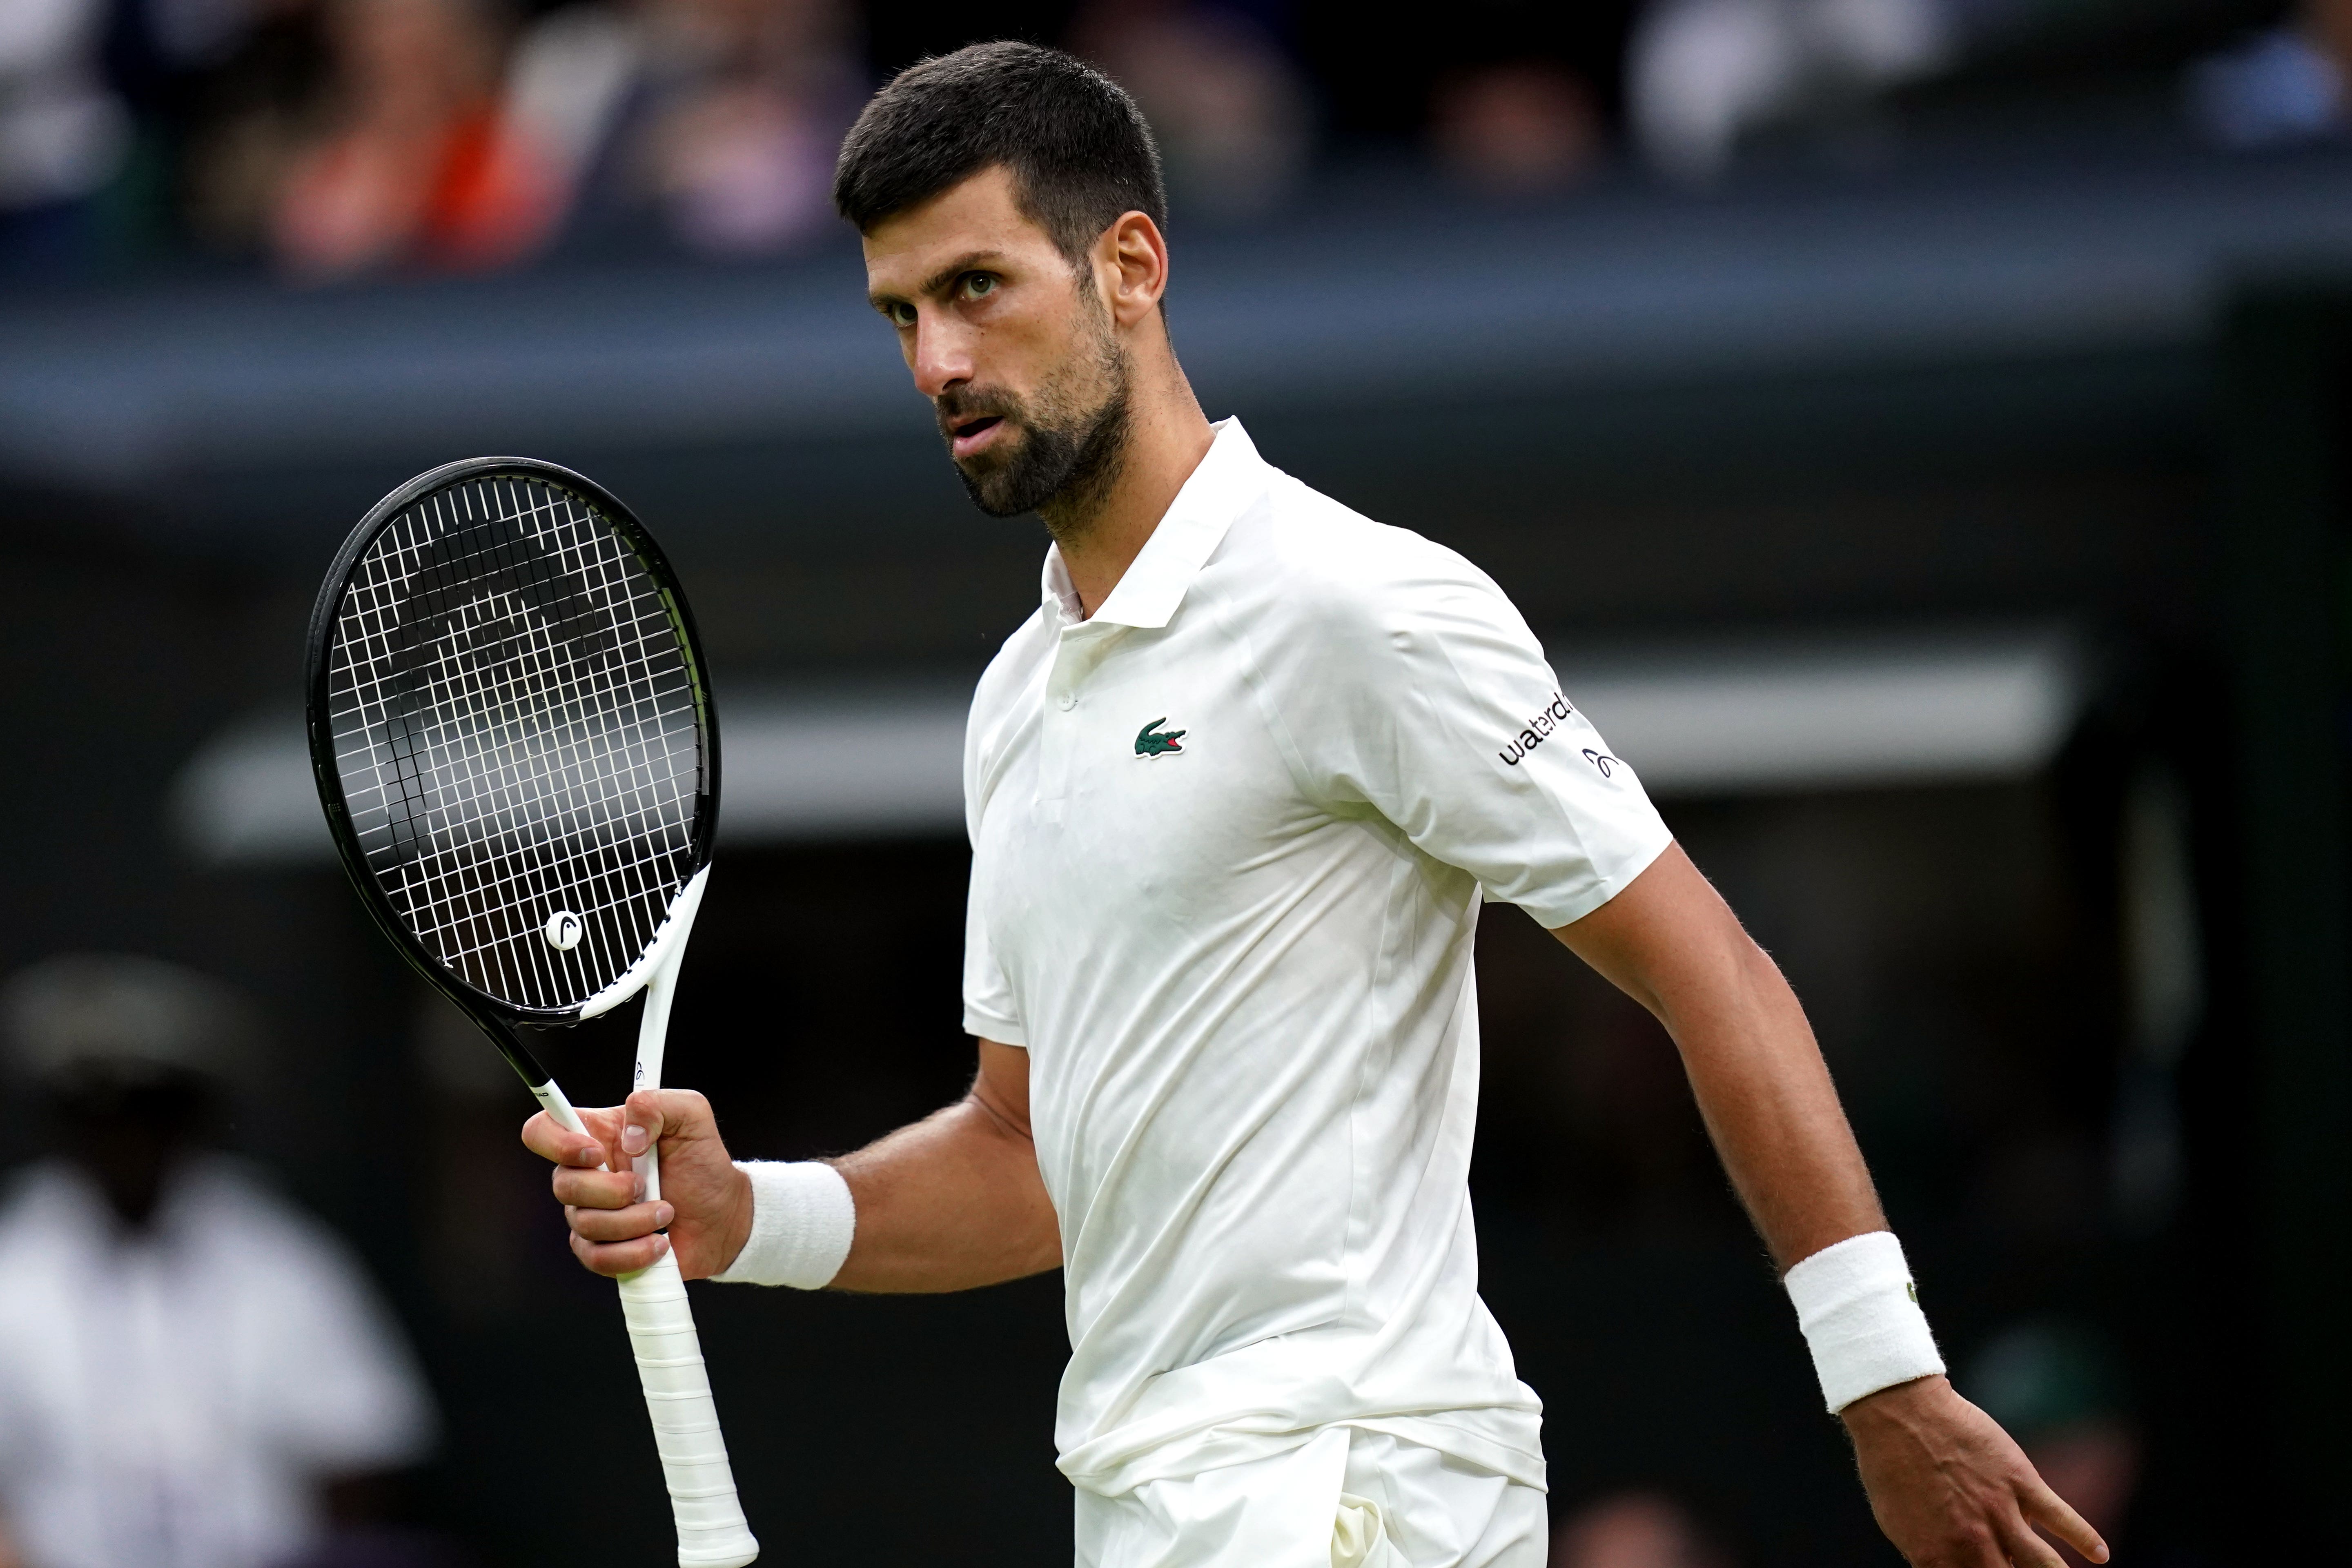 Wimbledon's final-set tie-break rules and how they've changed